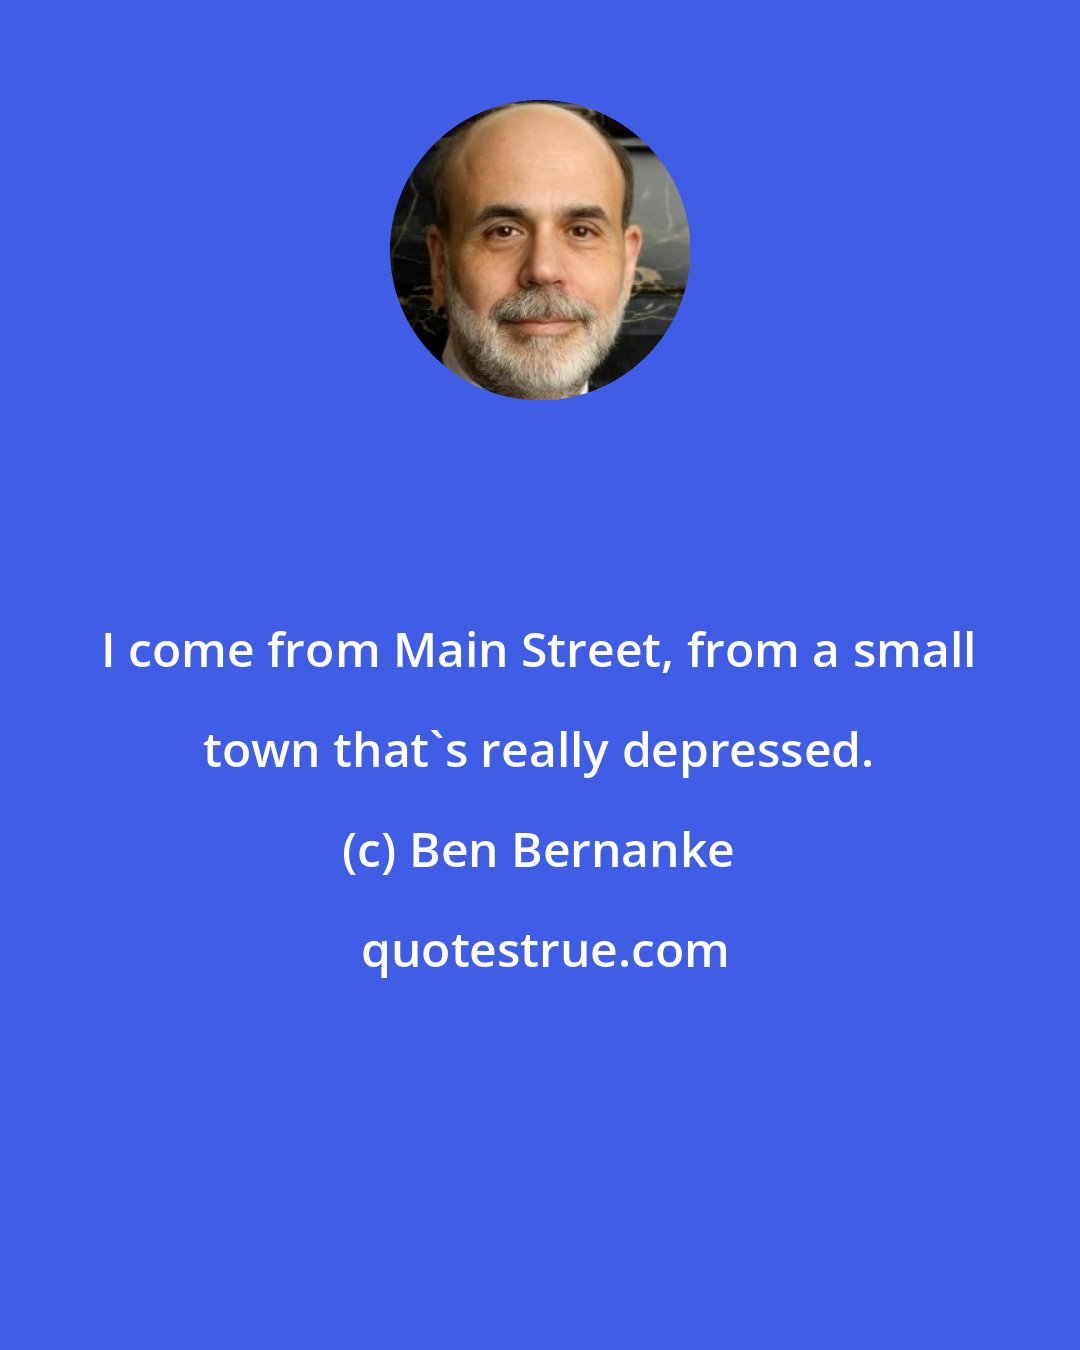 Ben Bernanke: I come from Main Street, from a small town that's really depressed.